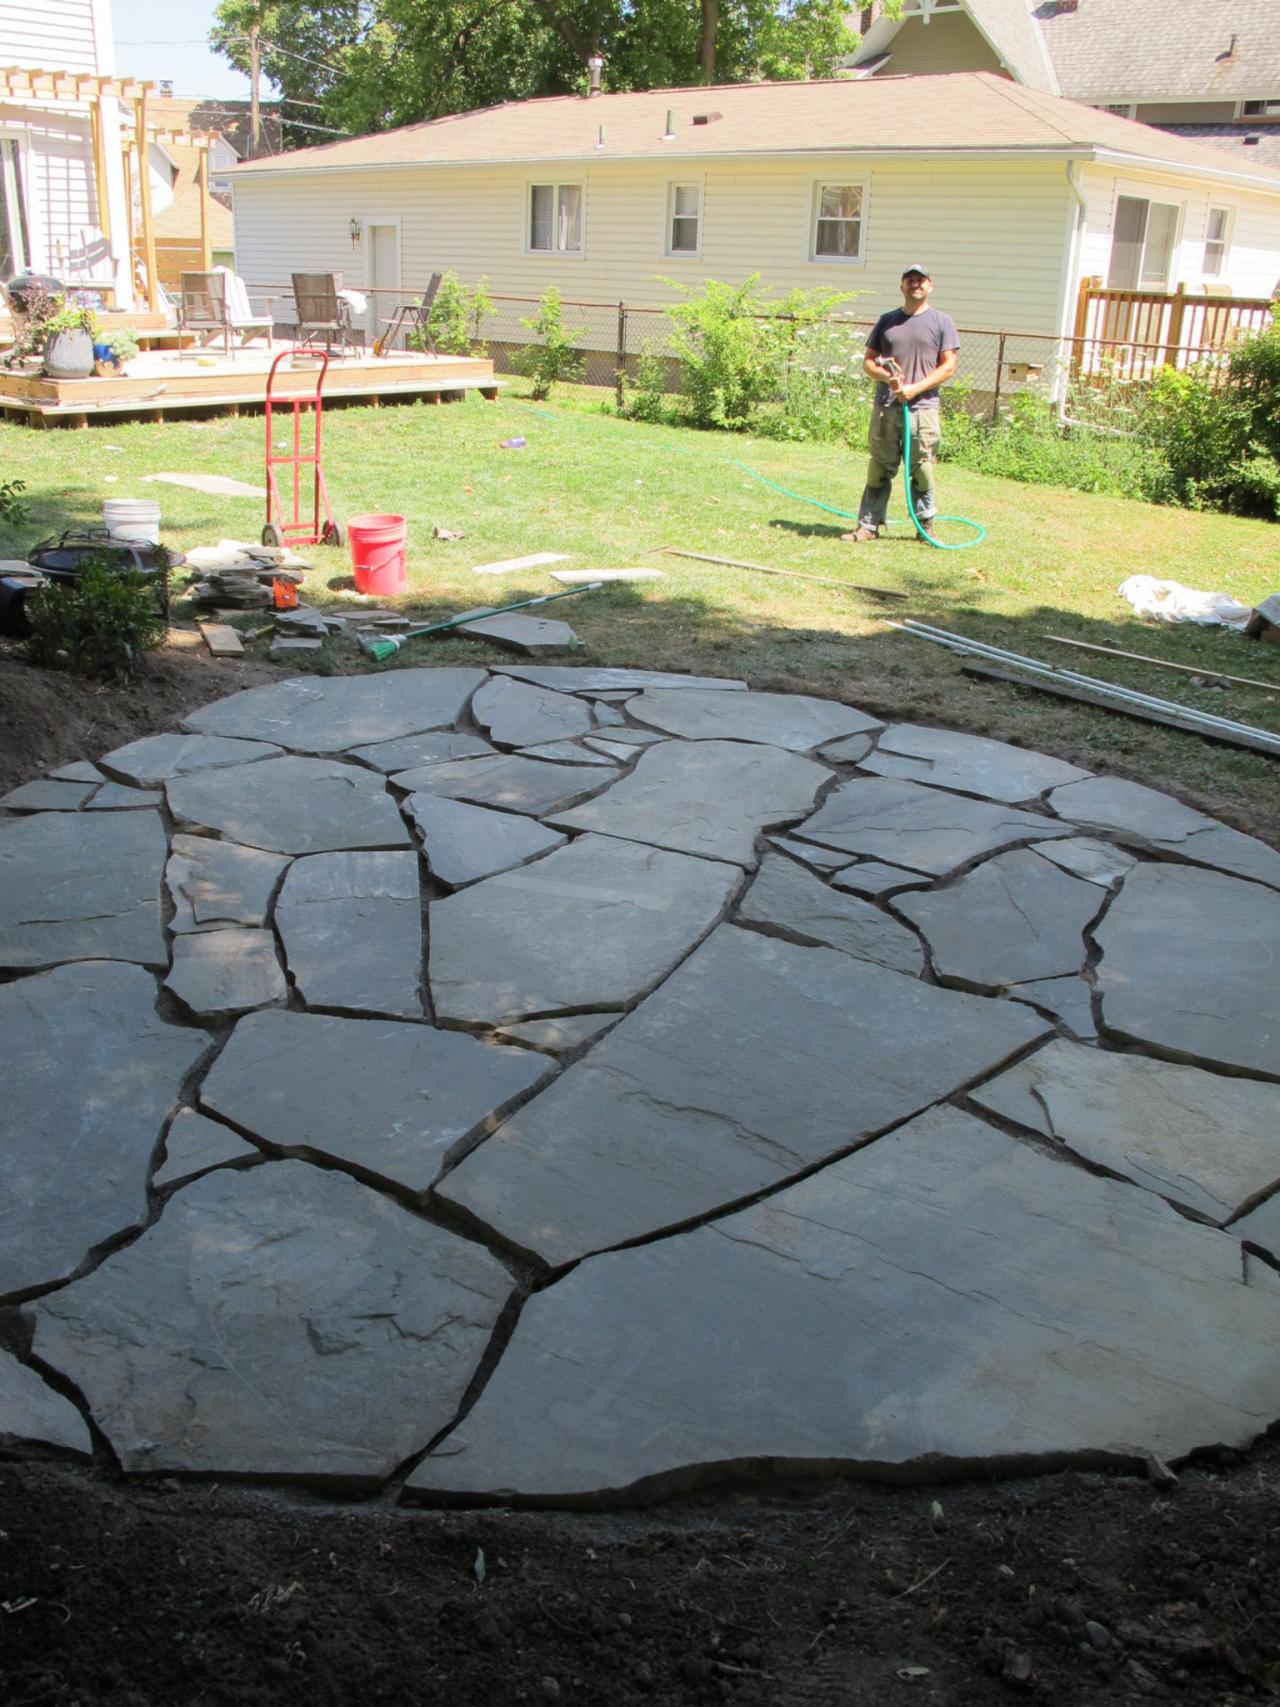 how to install a flagstone patio with irregular stones | diy network blog:  made + remade ZRWOCRZ